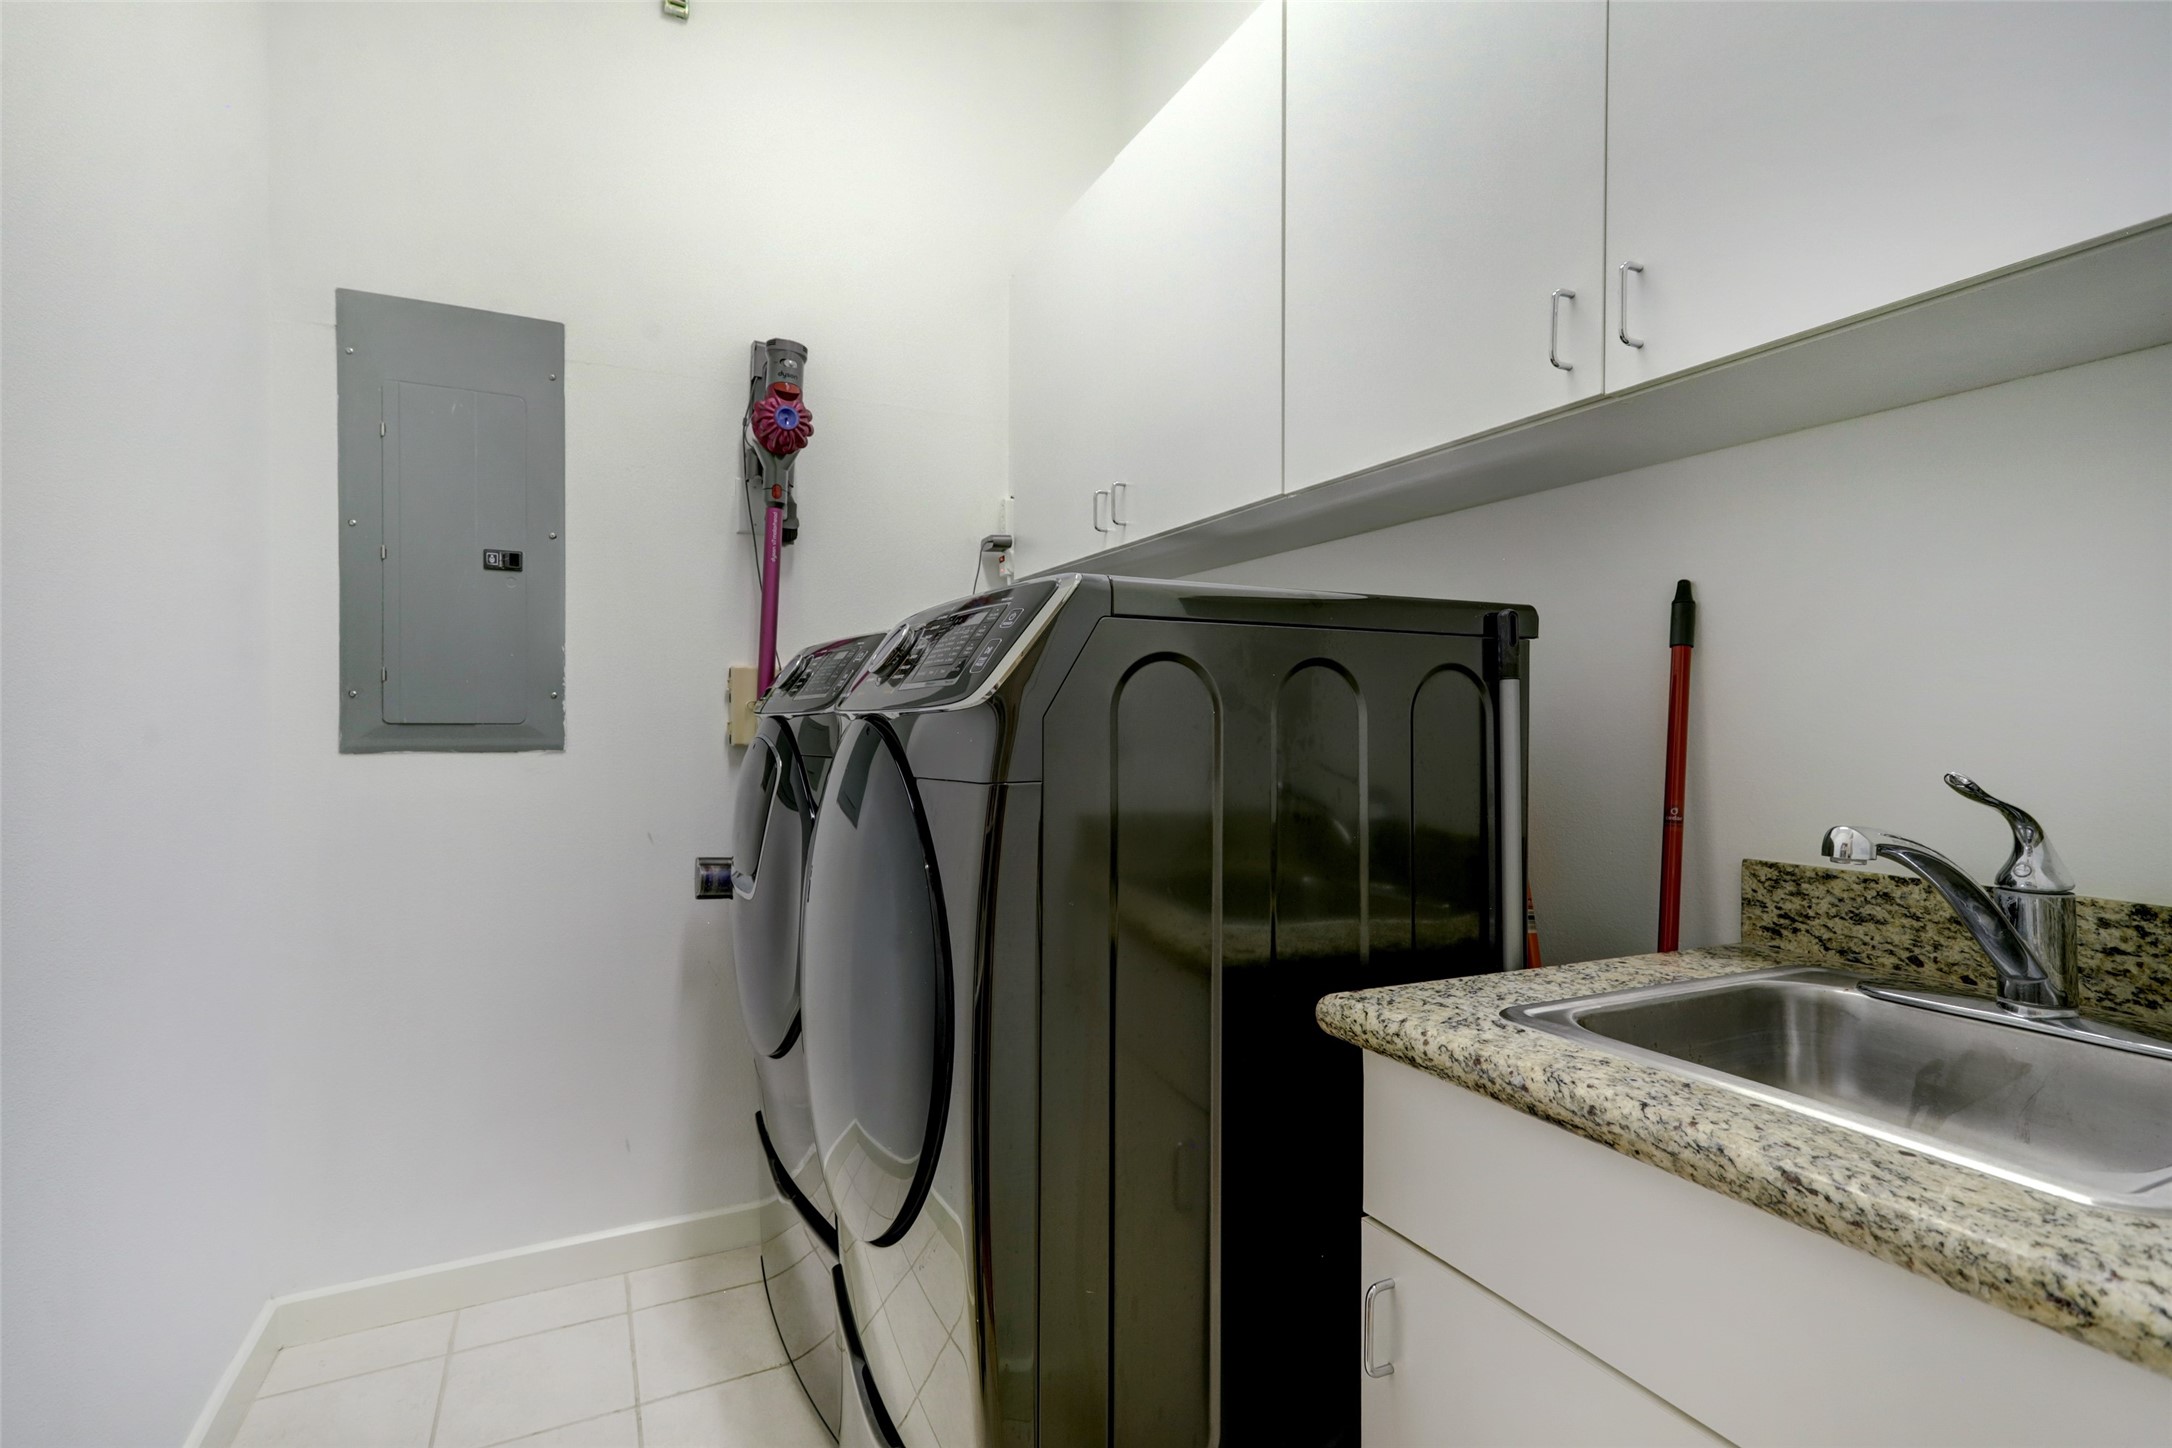 Large utility room with full size washer, dryer and utility sink.